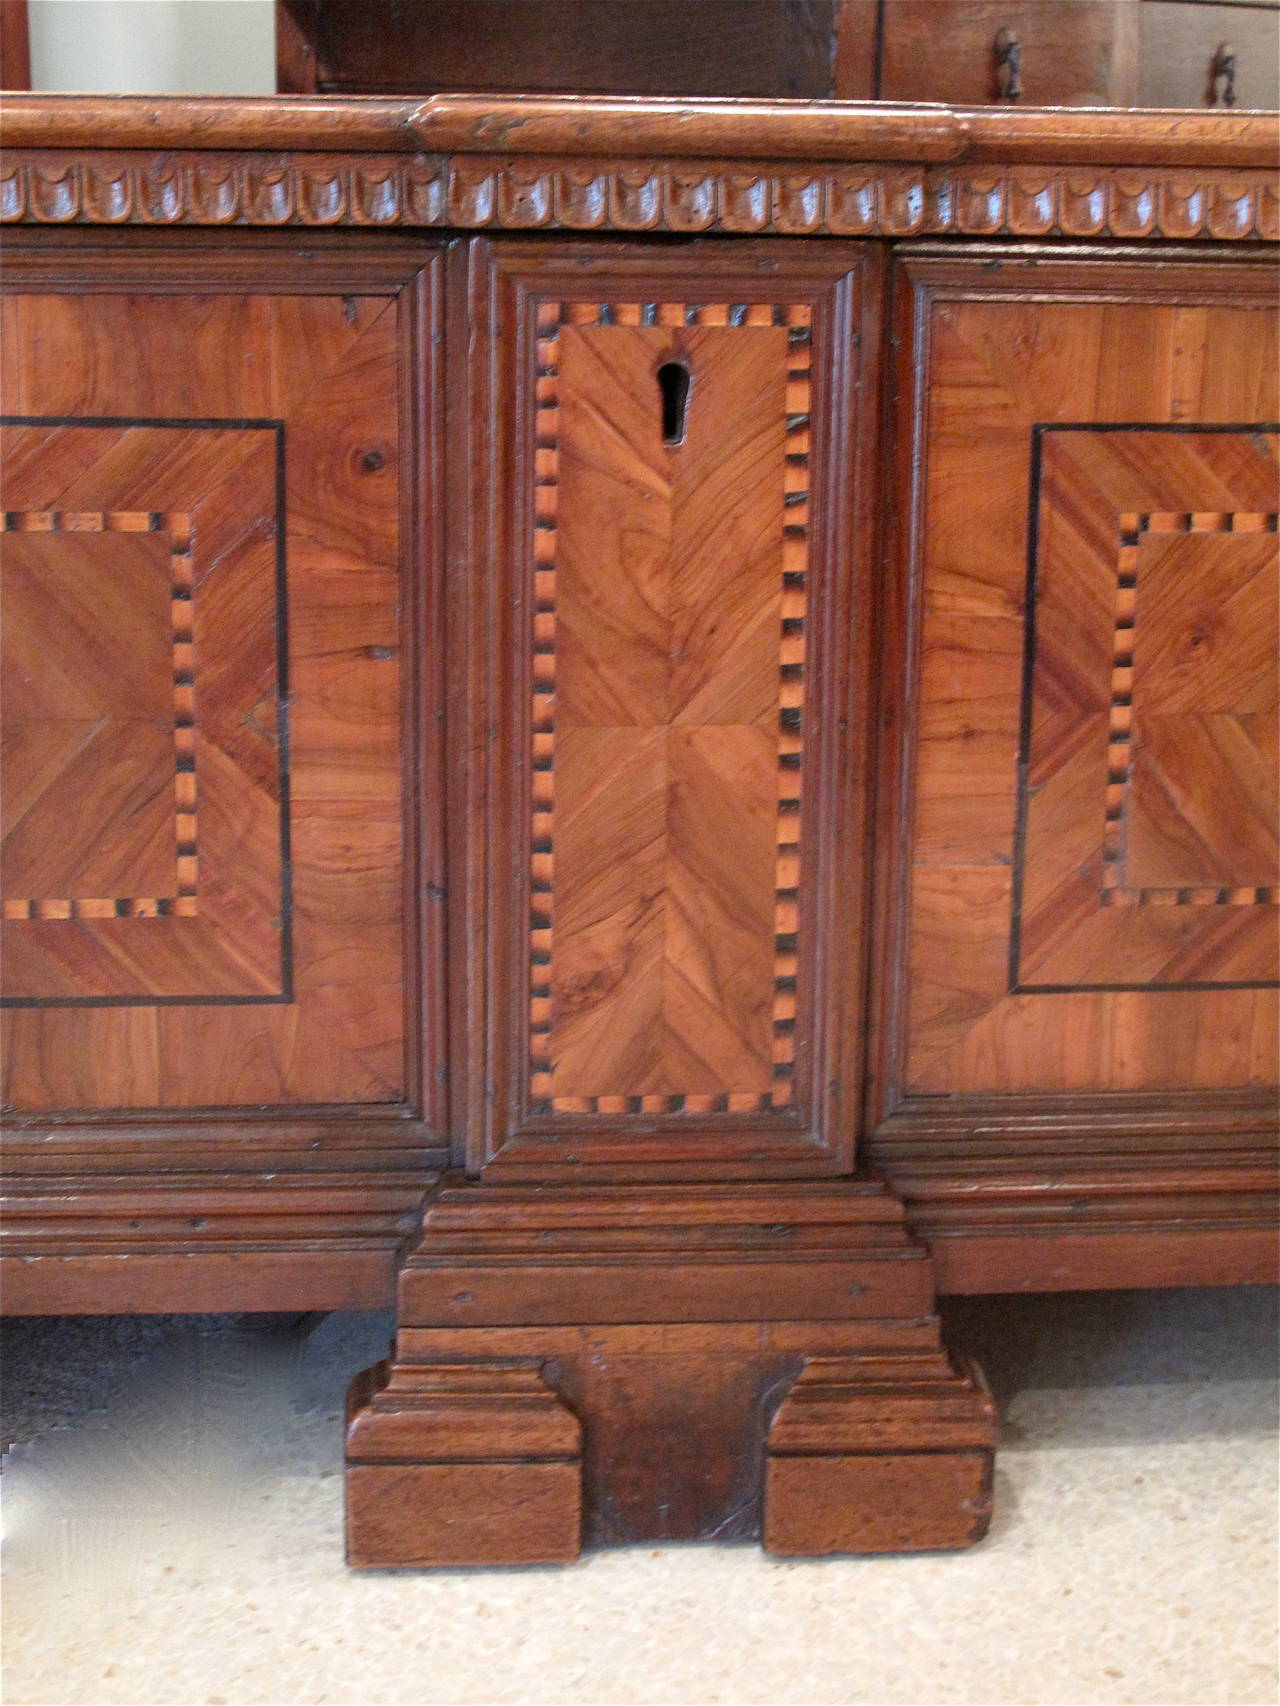 A dowry chest or cassone, from the second half of the 18th century, the front of somewhat architectural form, with a footed plinth and projecting “pilasters” separating the marquetry panels. Original strap hinges. Cassoni were given by the bride’s